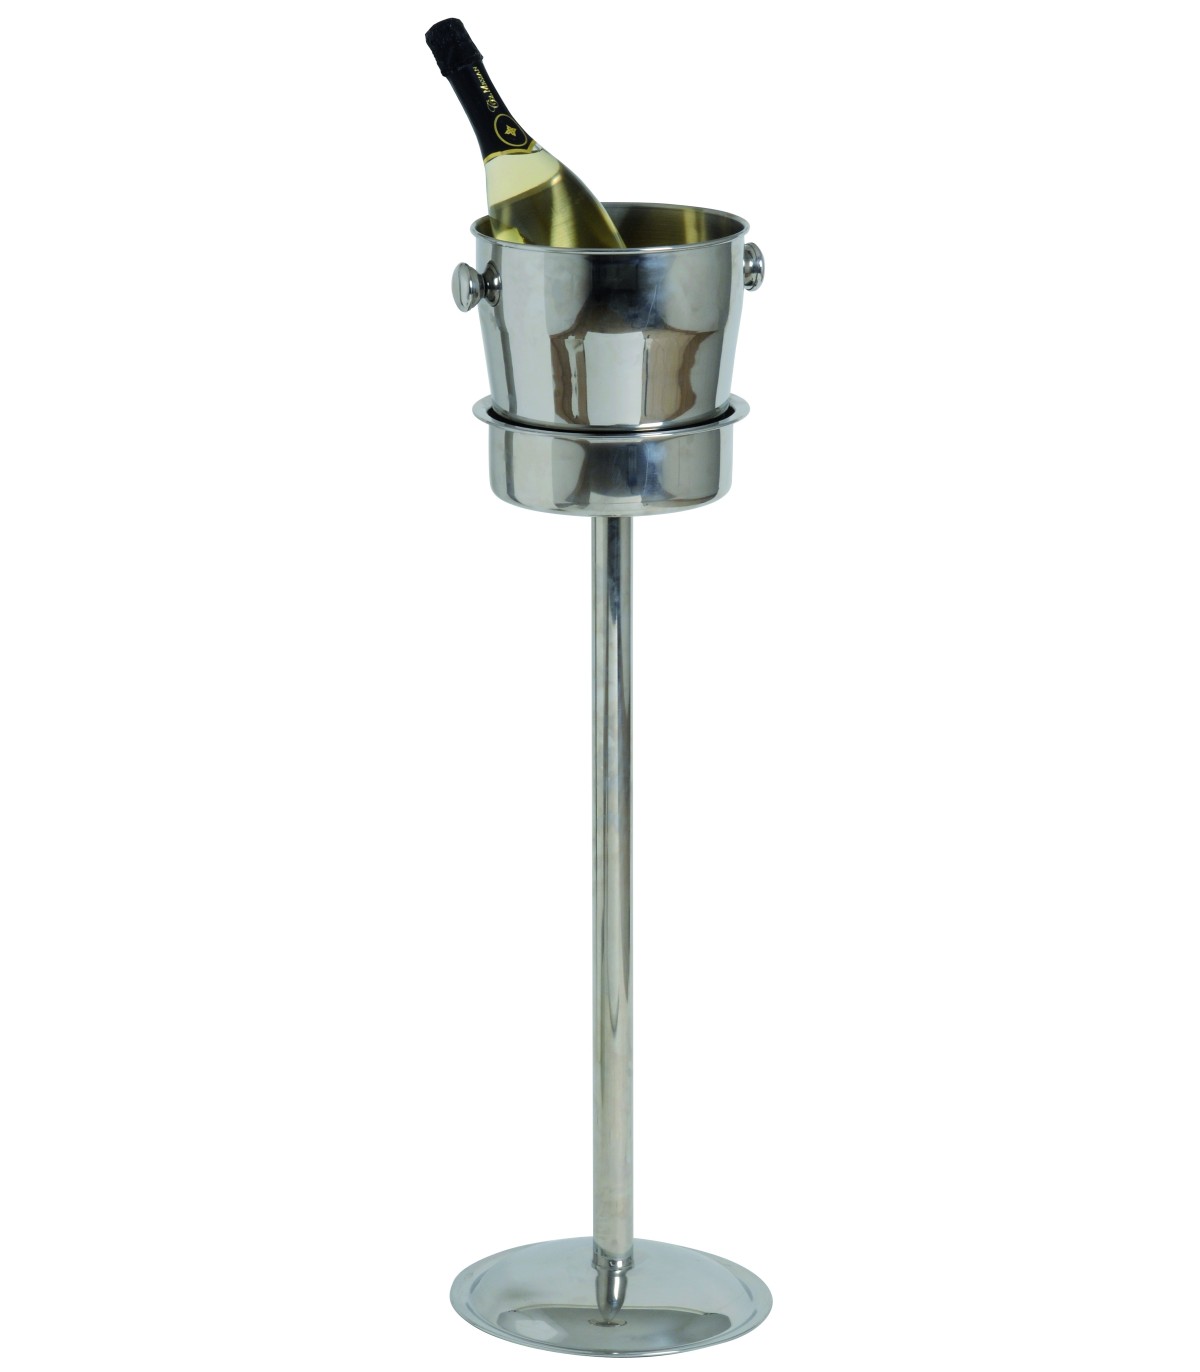 The port column Bucket in STAINLESS steel